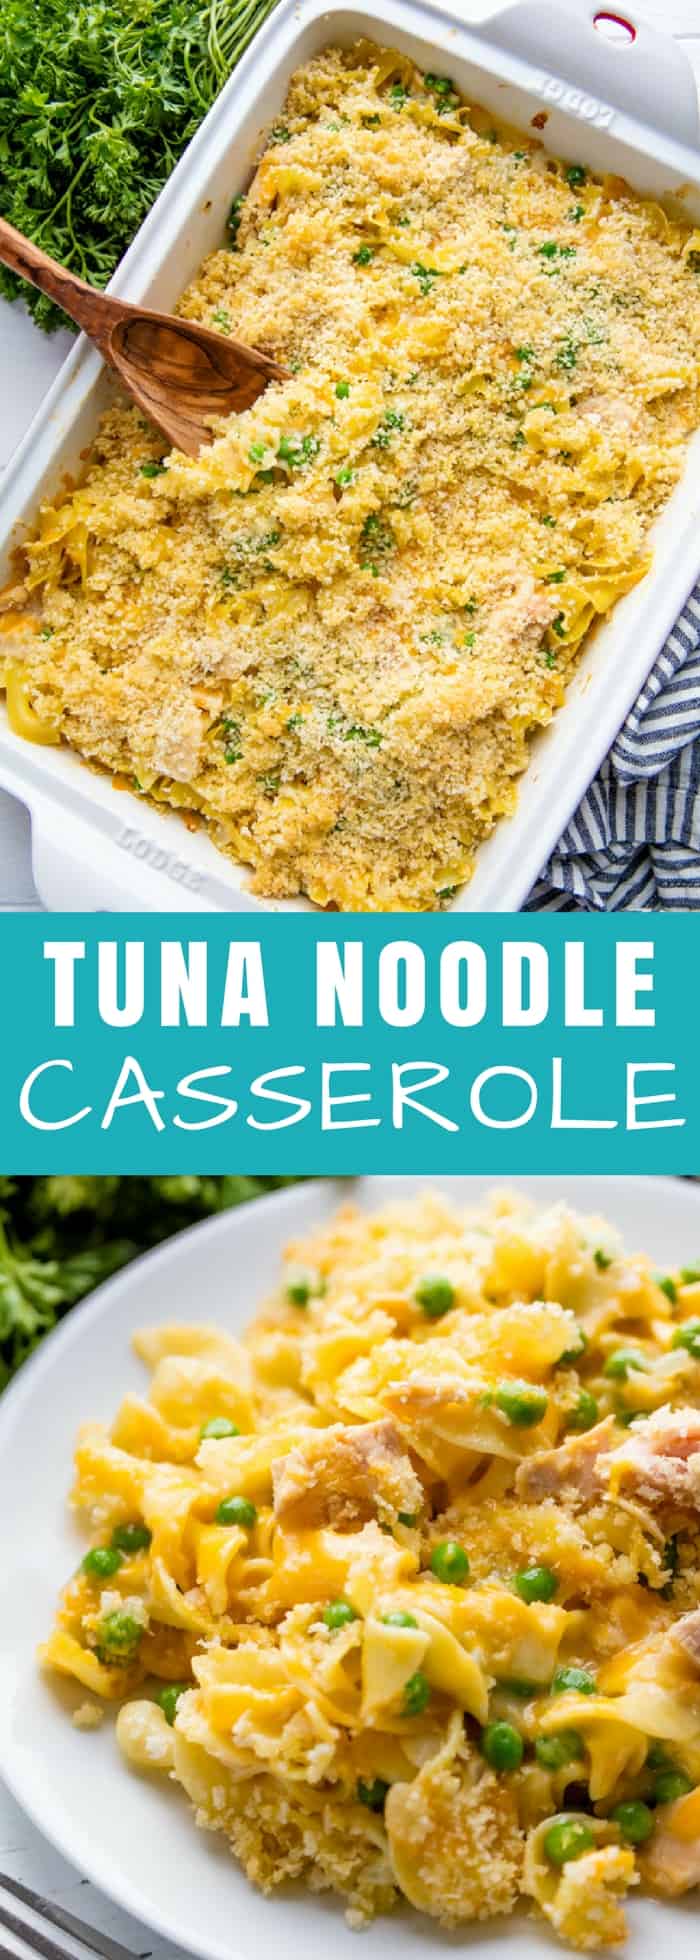 This cheesy Tuna Casserole has a made-from-scratch sauce and a crunchy parmesan topping that puts this classic recipe over the top. Your family will love this version!